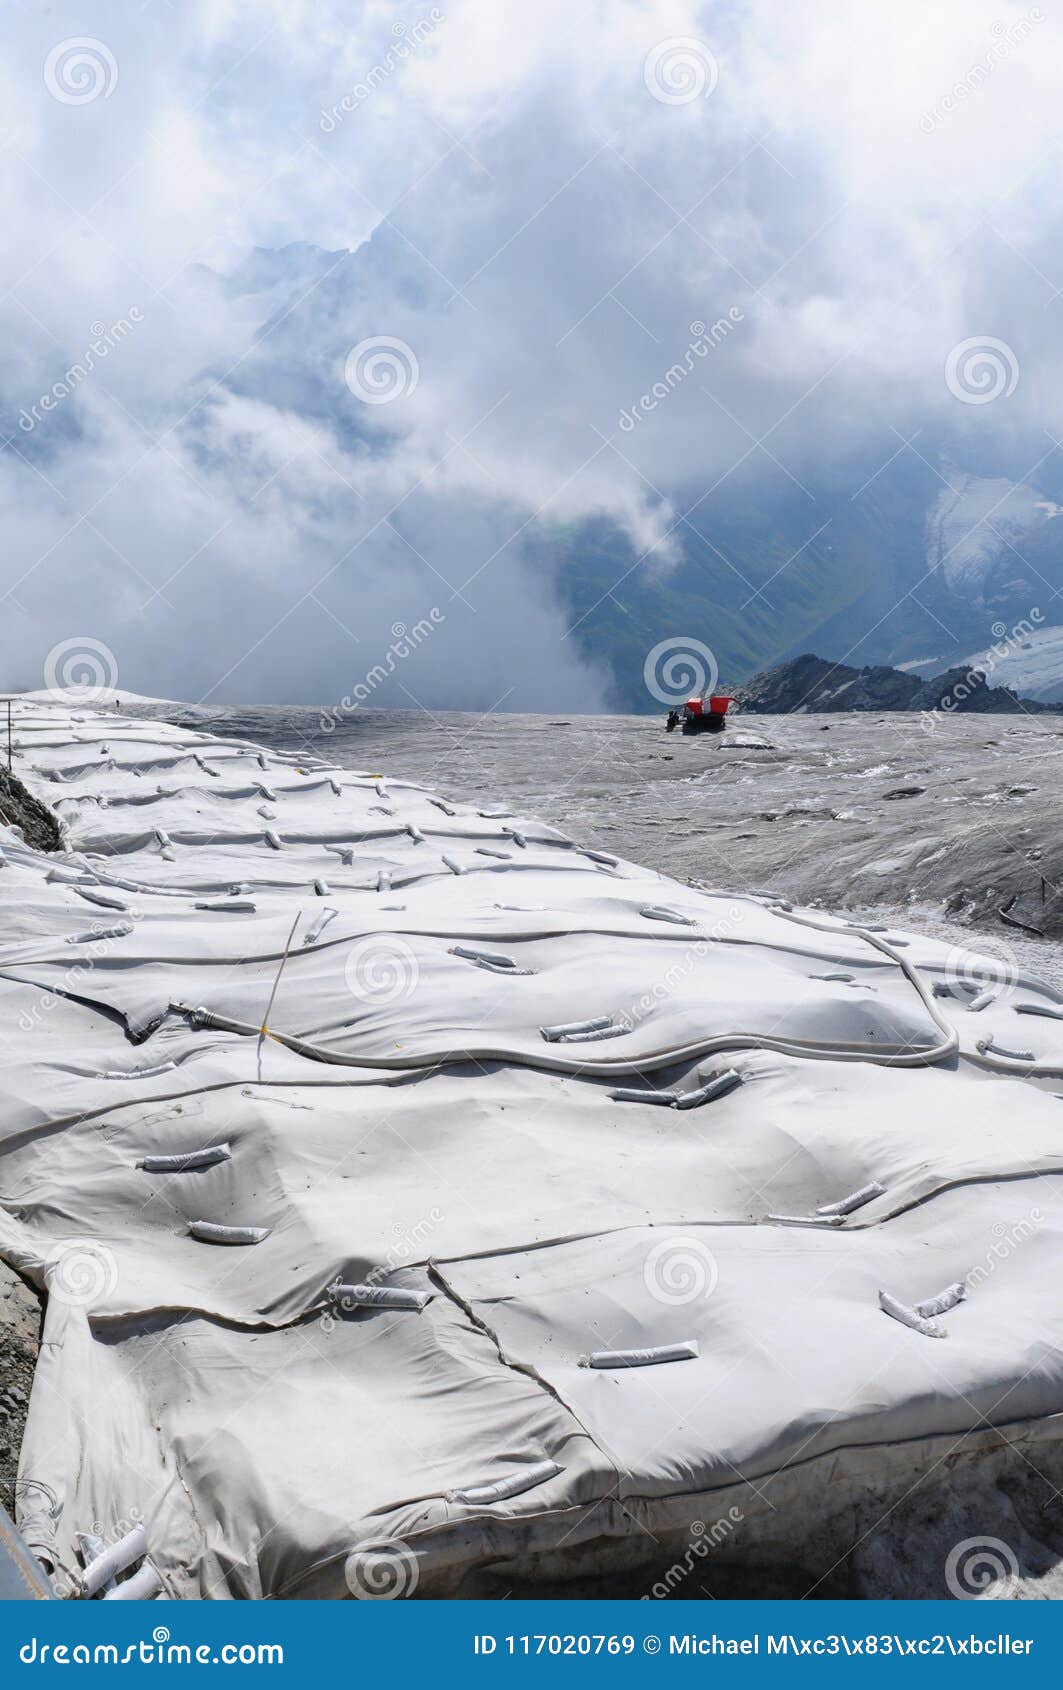 global clima change: the corvatsch-glacier near st. moritz cover